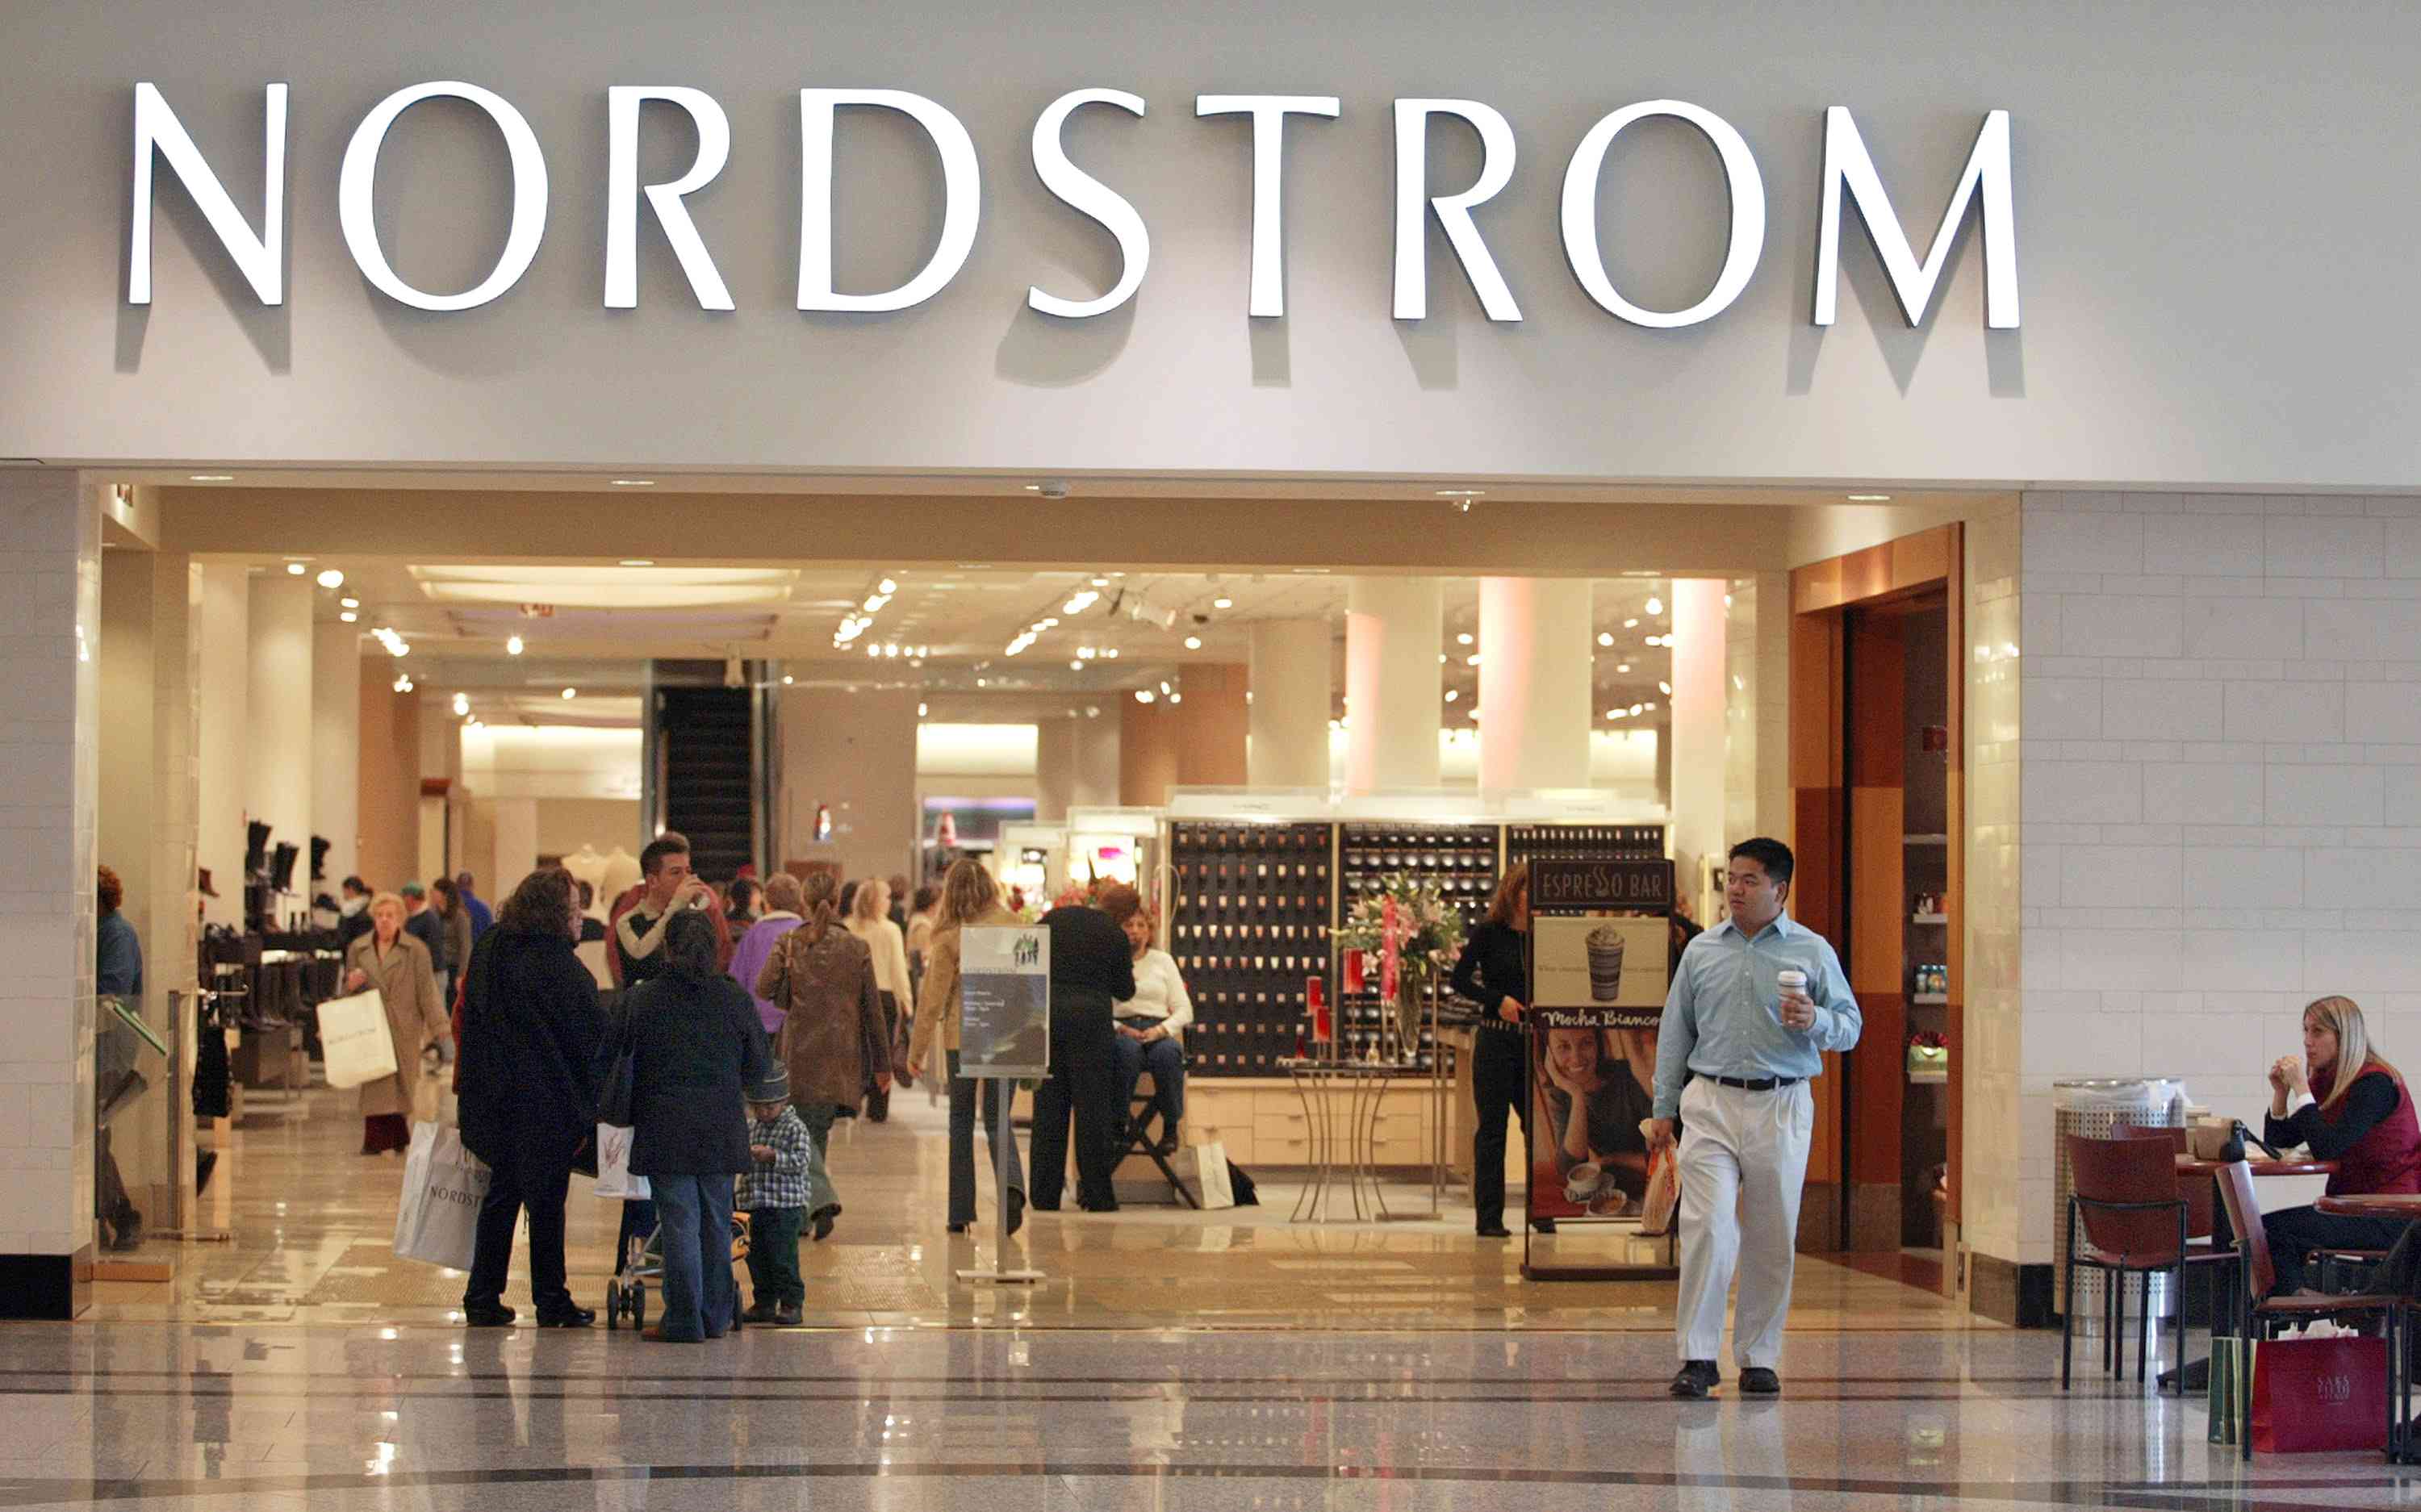 difference between nordstrom and nordstrom rack